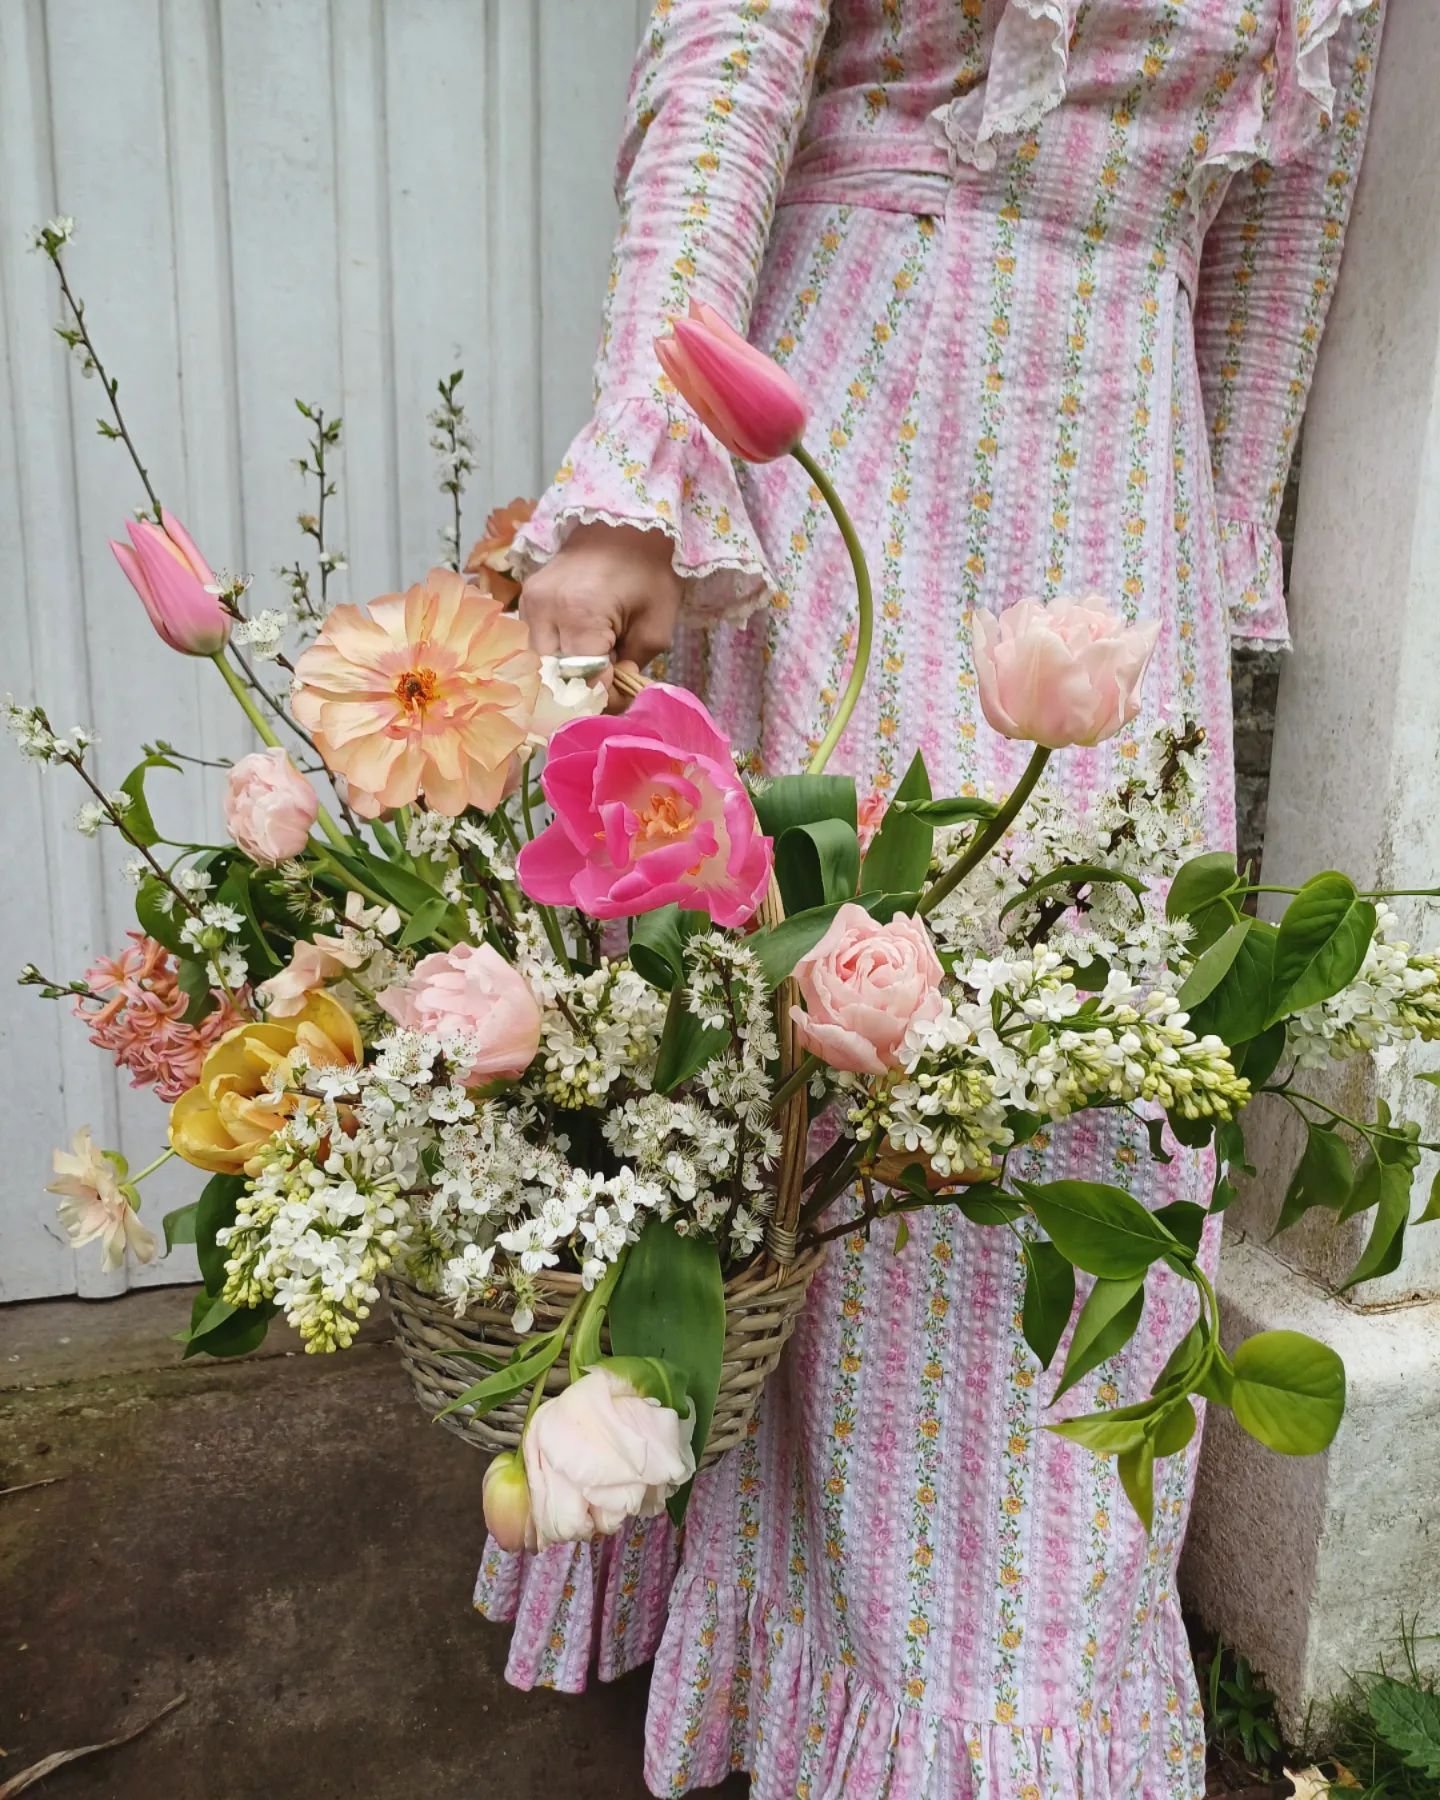 This time next week, @littlepinkgarden and I will be putting the final touches in place for our floral basket workshop on Saturday, May 4th. We still have a couple of places available, so if you've been thinking of booking, please do.

Let's hope the